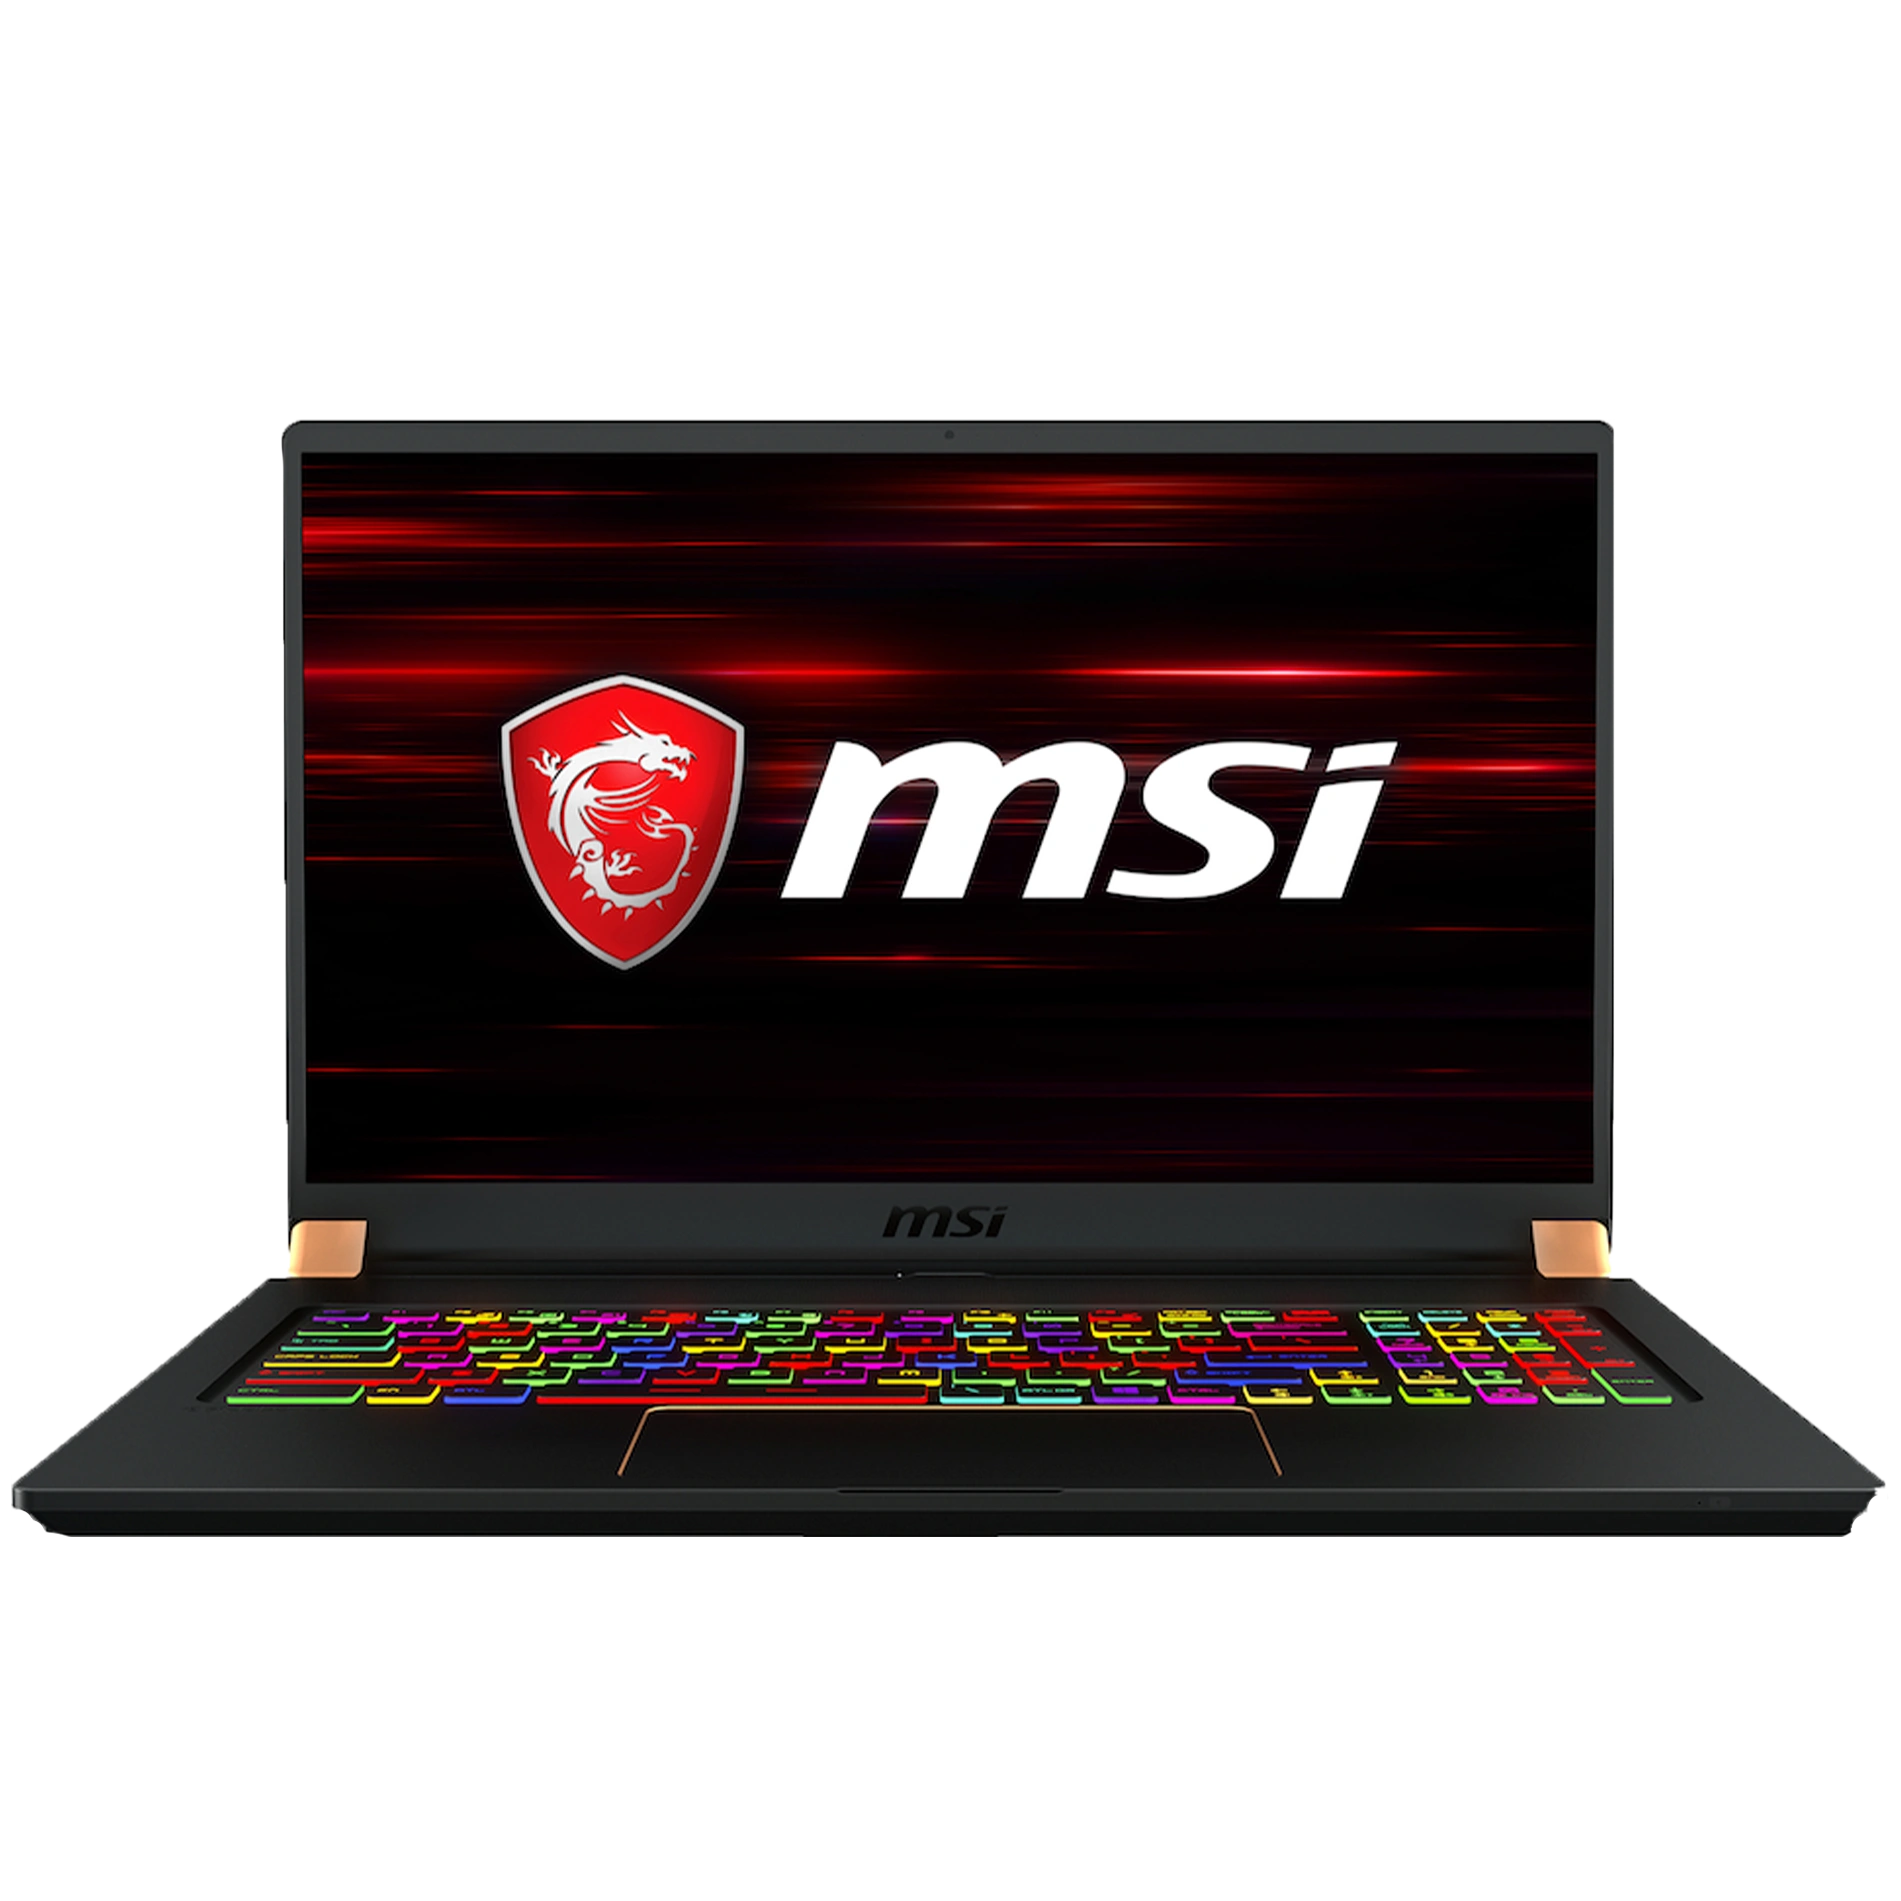  MSI GS75 Stealth  VR Ready Laptop with logo on the screen